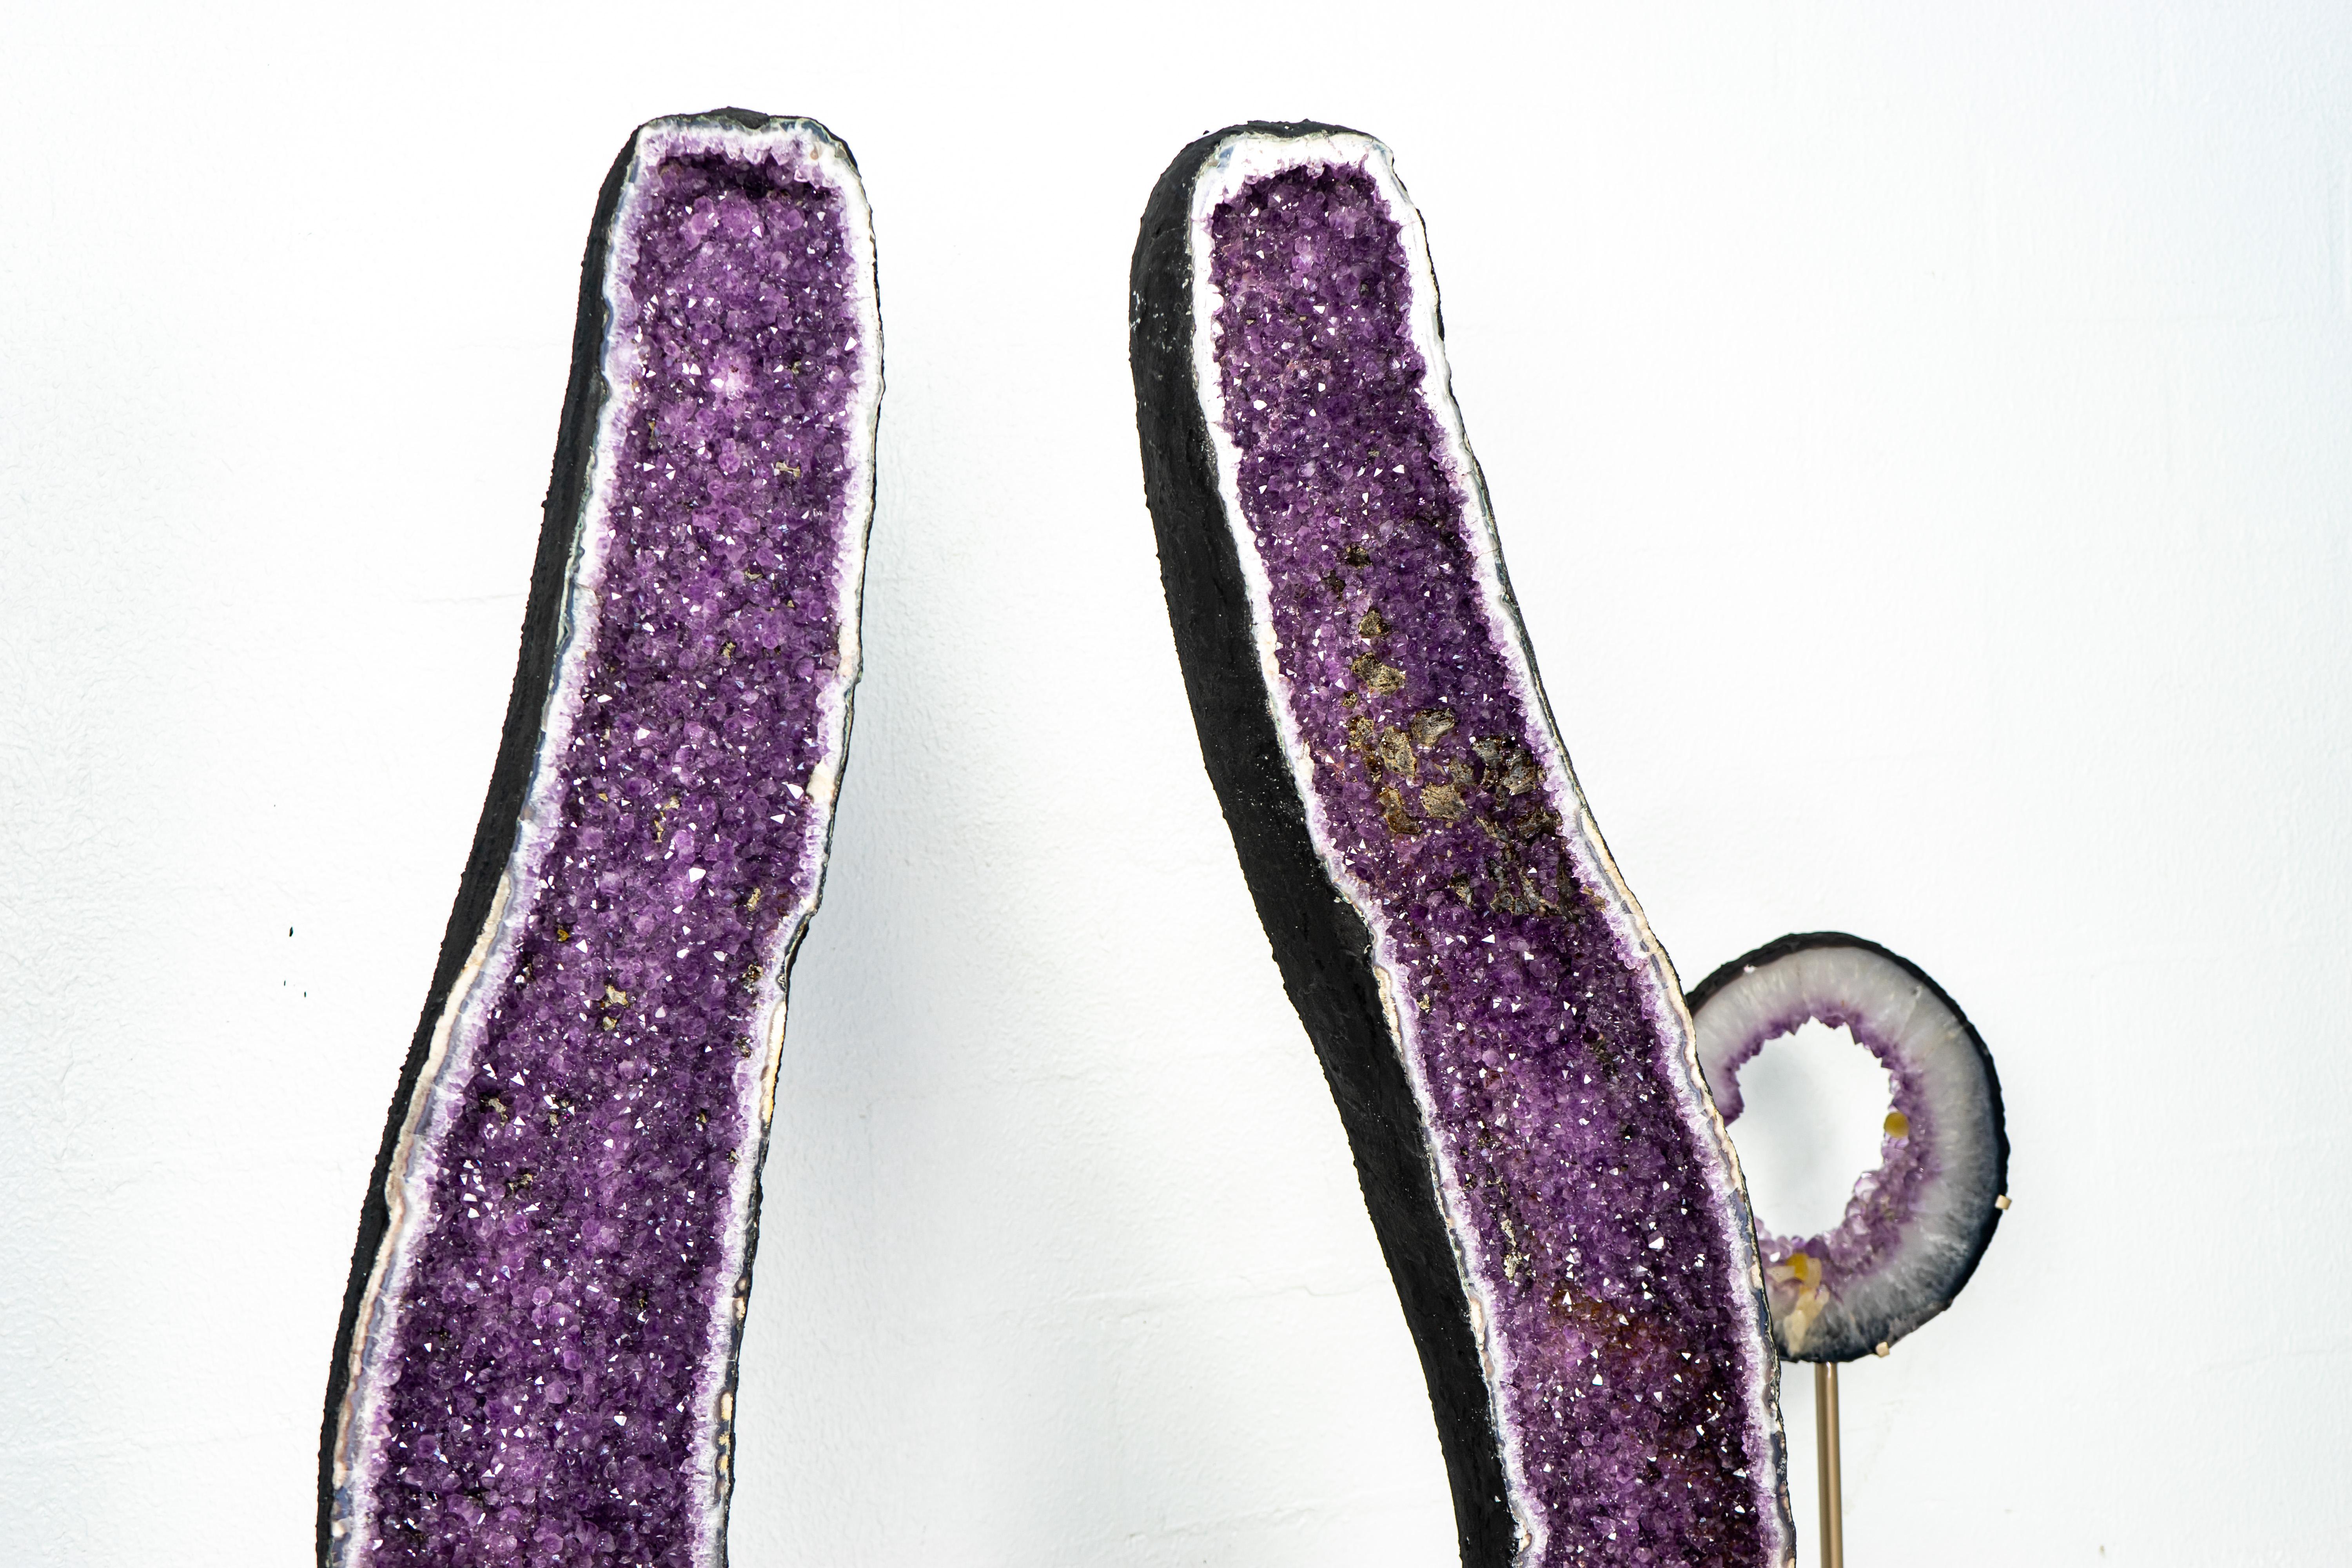 Brazilian Pair of Purple, X-Tall Amethyst Geode Cathedrals Formed in Archway For Sale